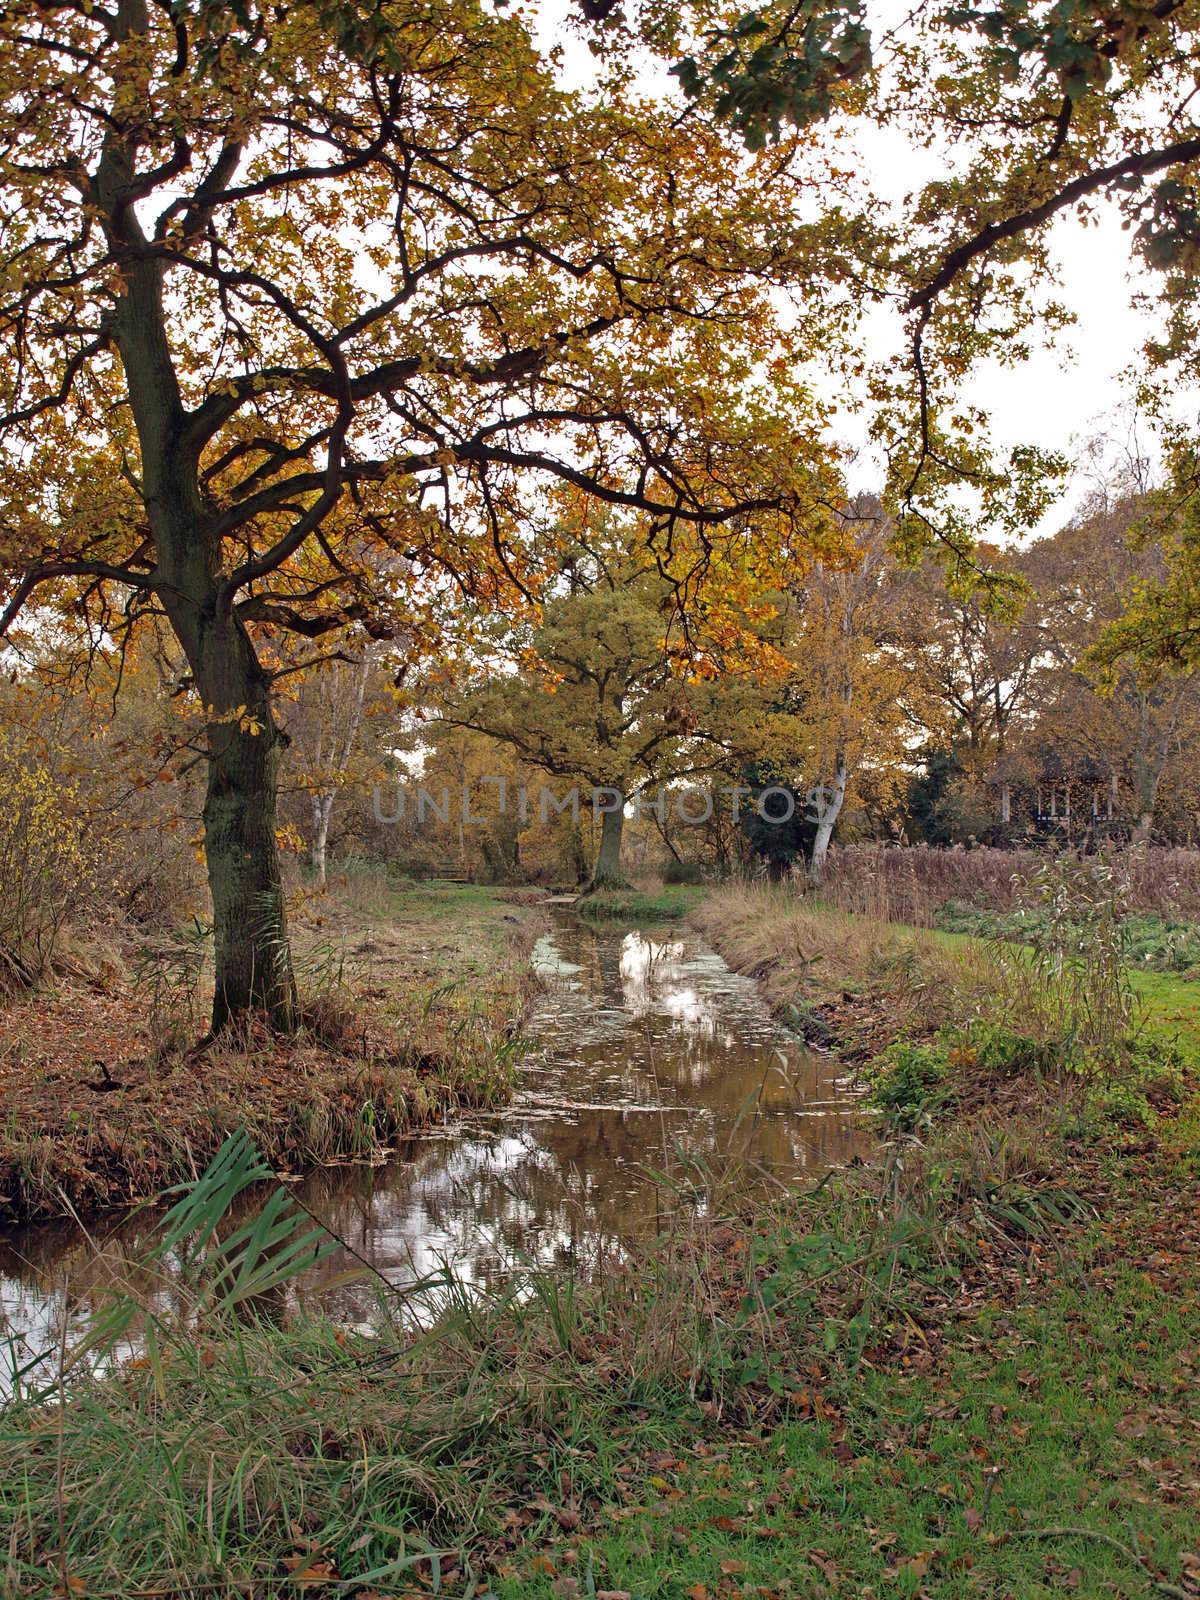 Autumn trees and dykes in Woodwalton fen nature reserve. Part of The Great Fen Project, that aims to restore over 3000 hectares of fenland habitat between Huntingdon and Peterborough.